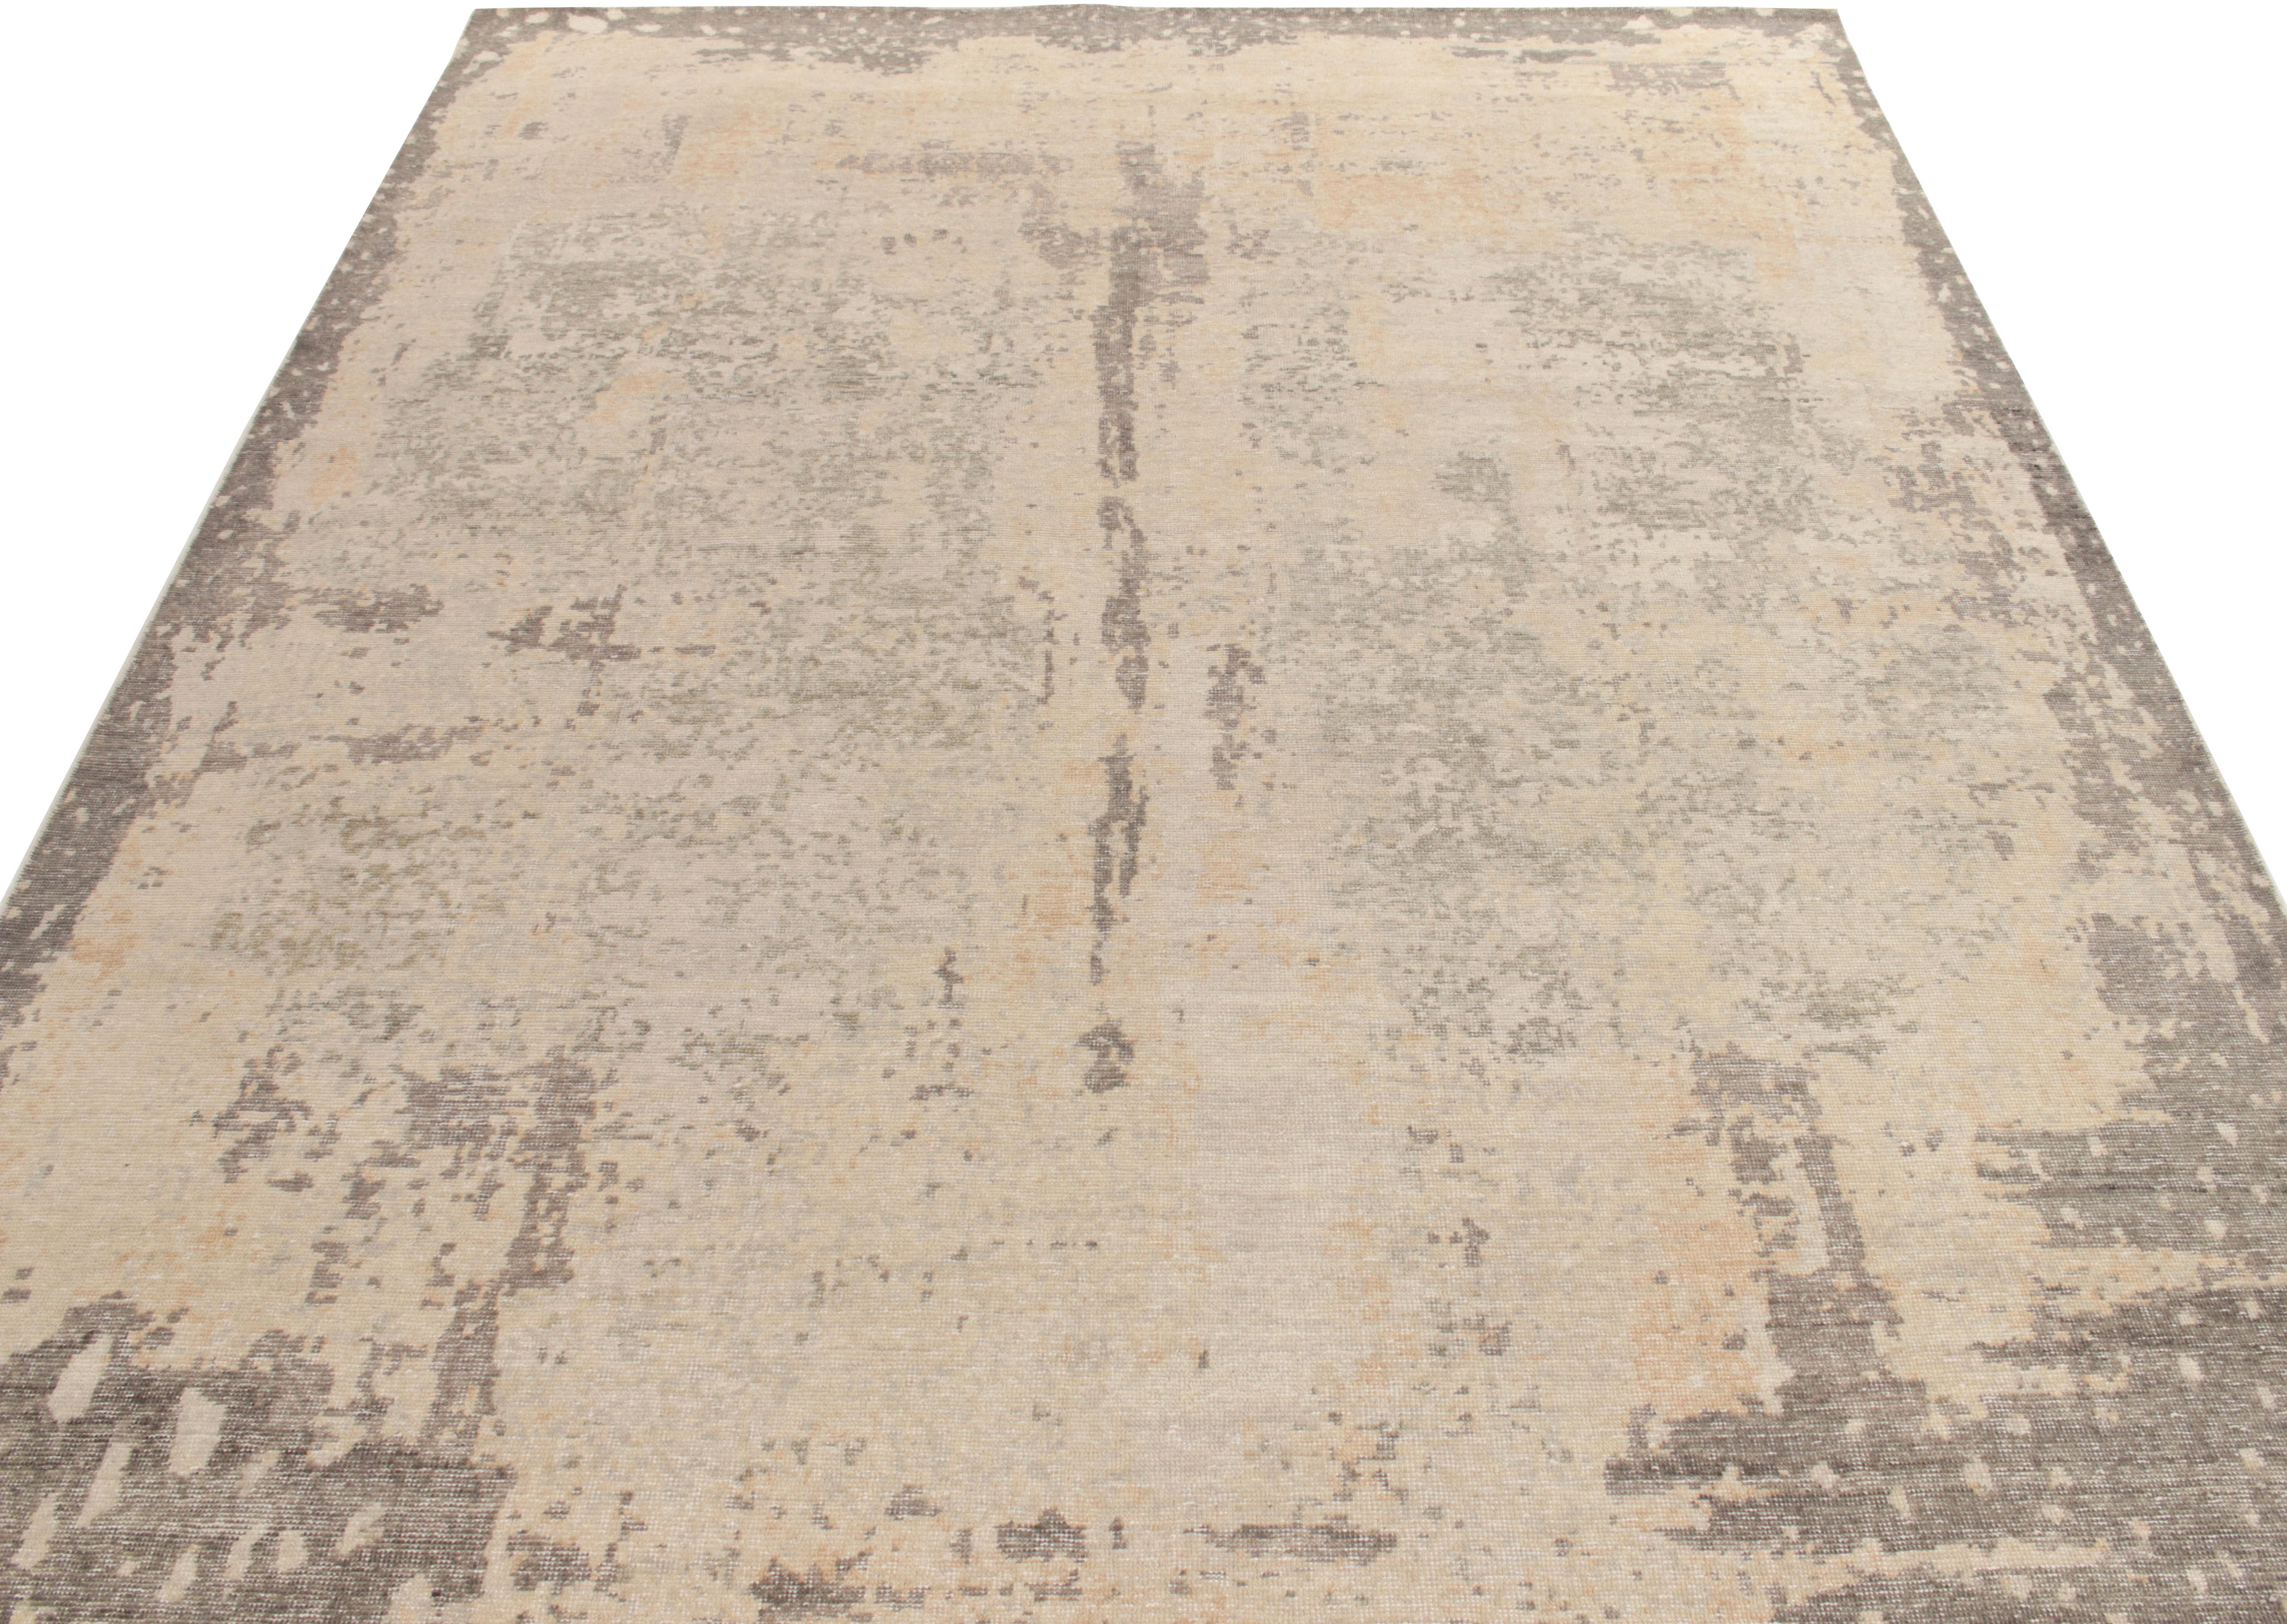 From rug & Kilim’s Homage collection, a 9 x 12 distressed style abstract rug in silver/gray, cream & beige colorways playing positive negative that perfectly matches the shabby chic vibe of this celebrated line. Comfortably washed, a customizable